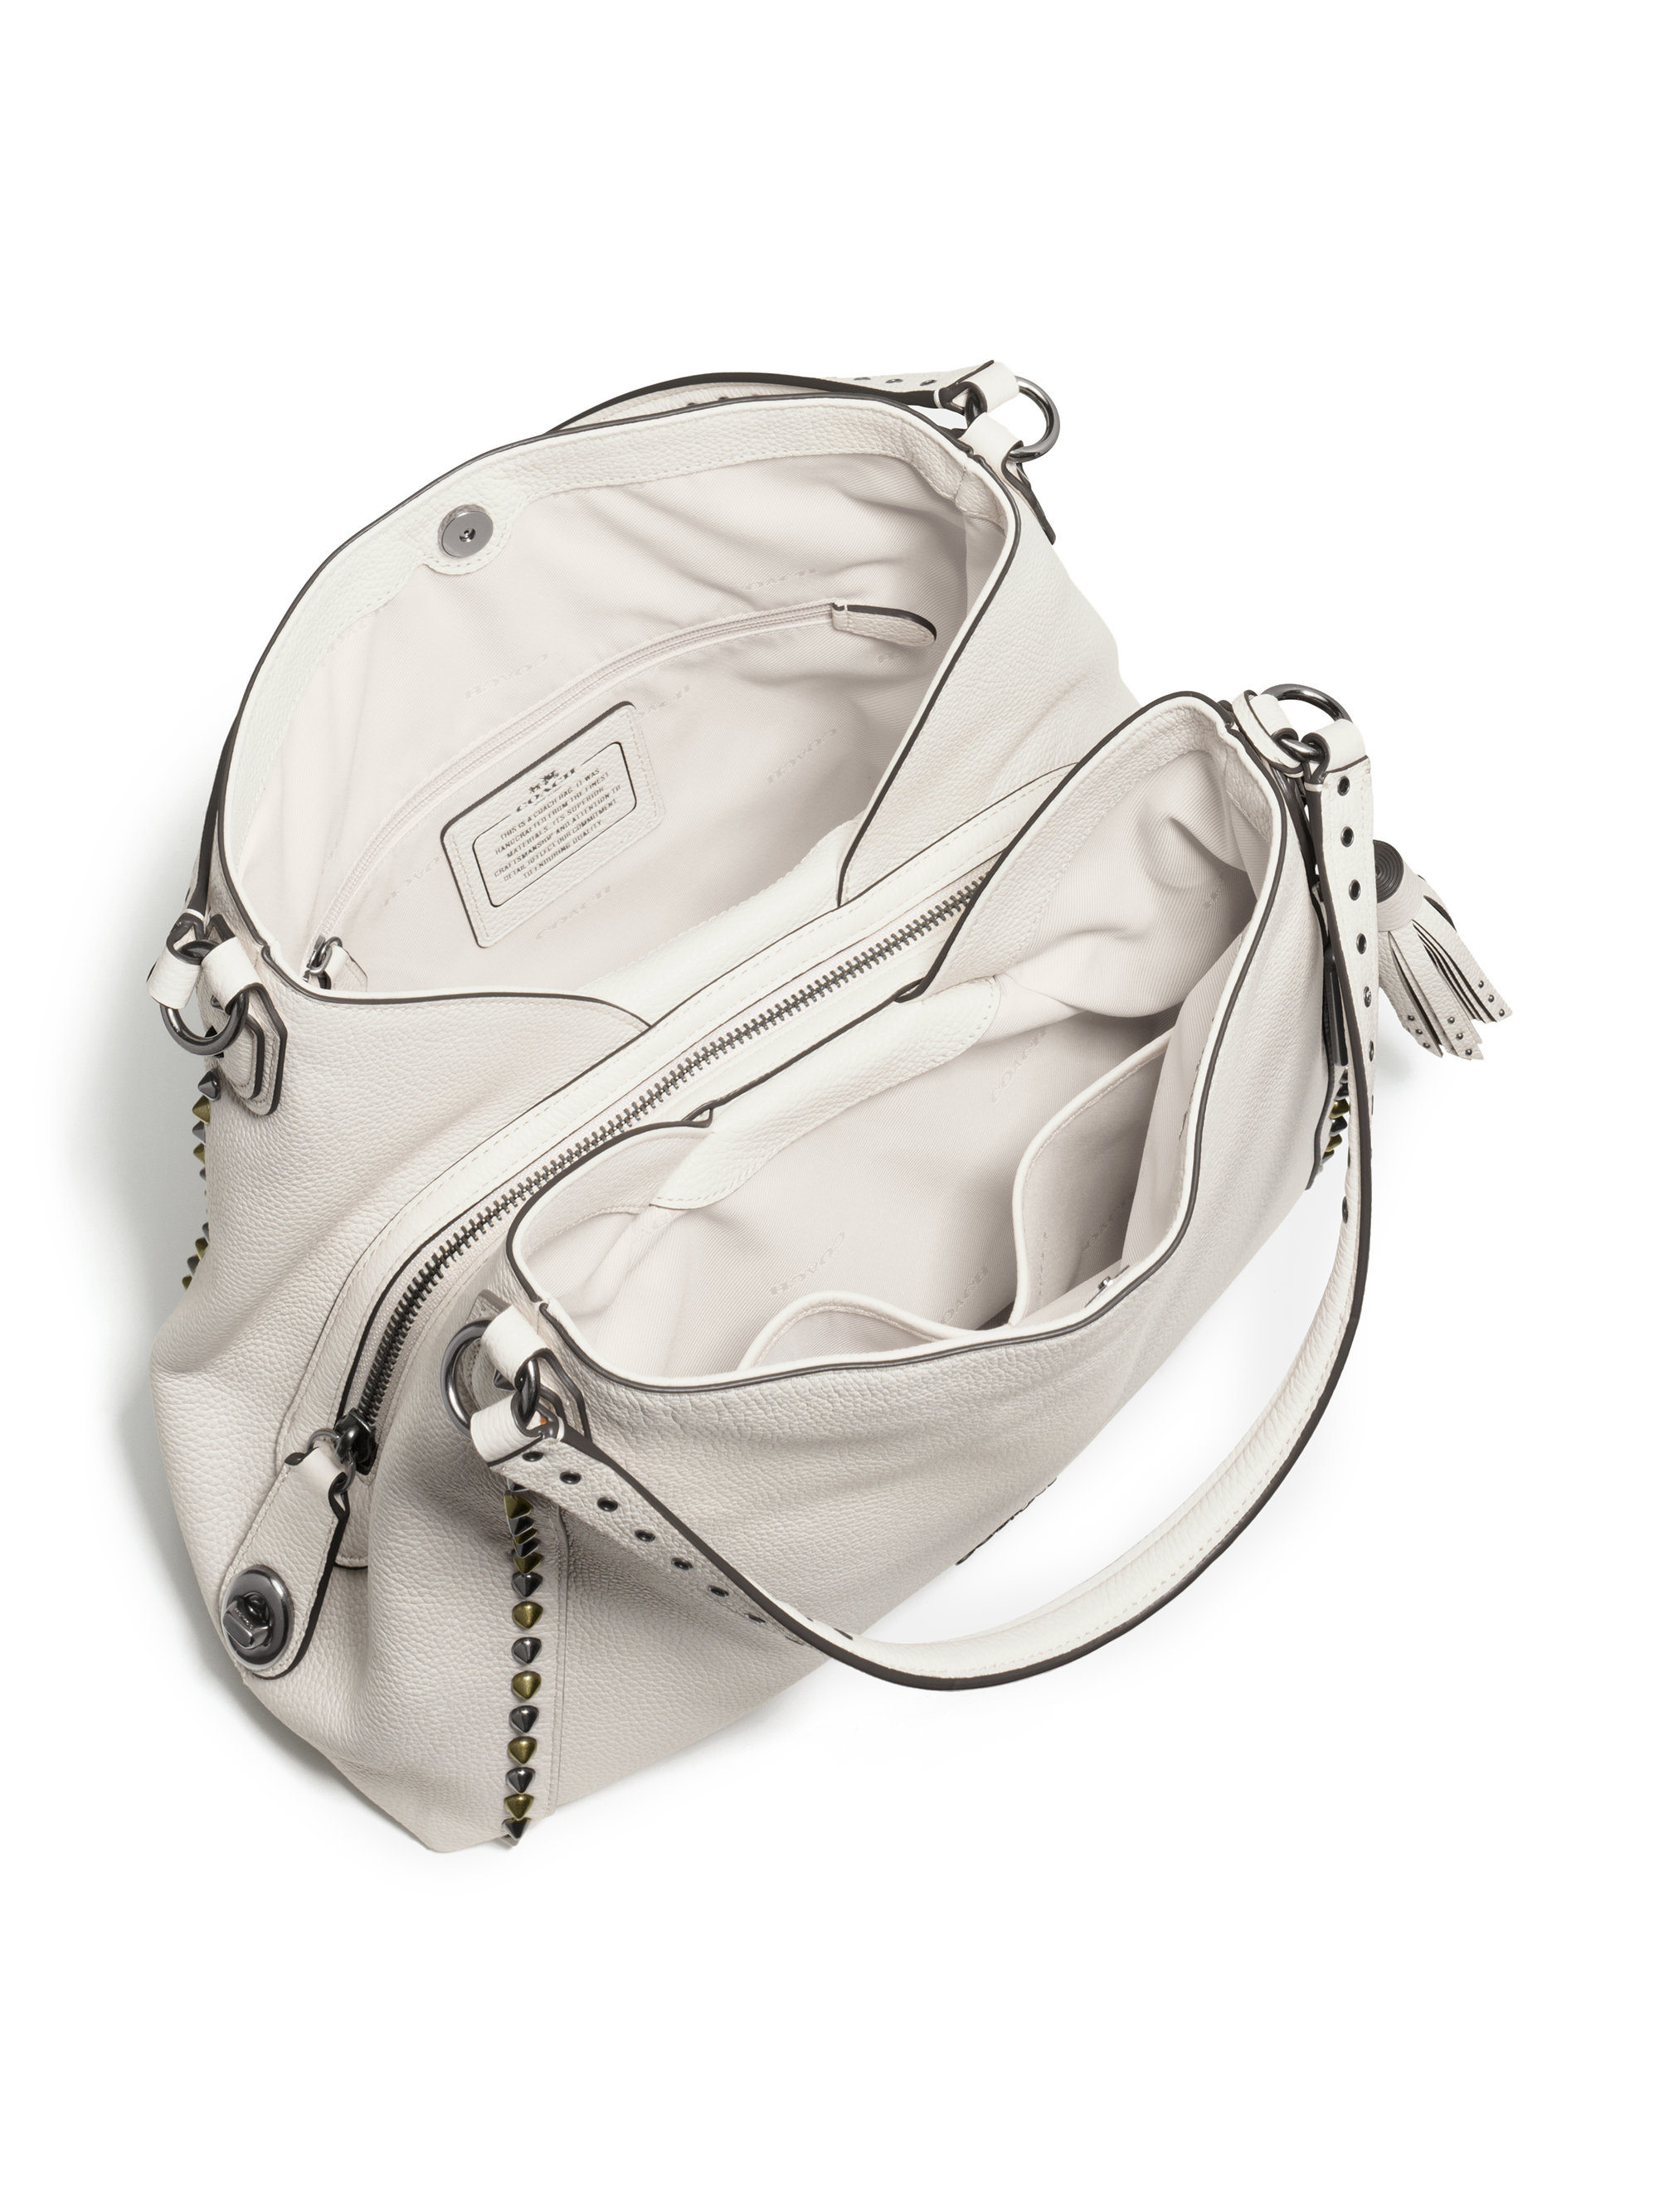 COACH Edie Studded Leather Shoulder Bag in White | Lyst